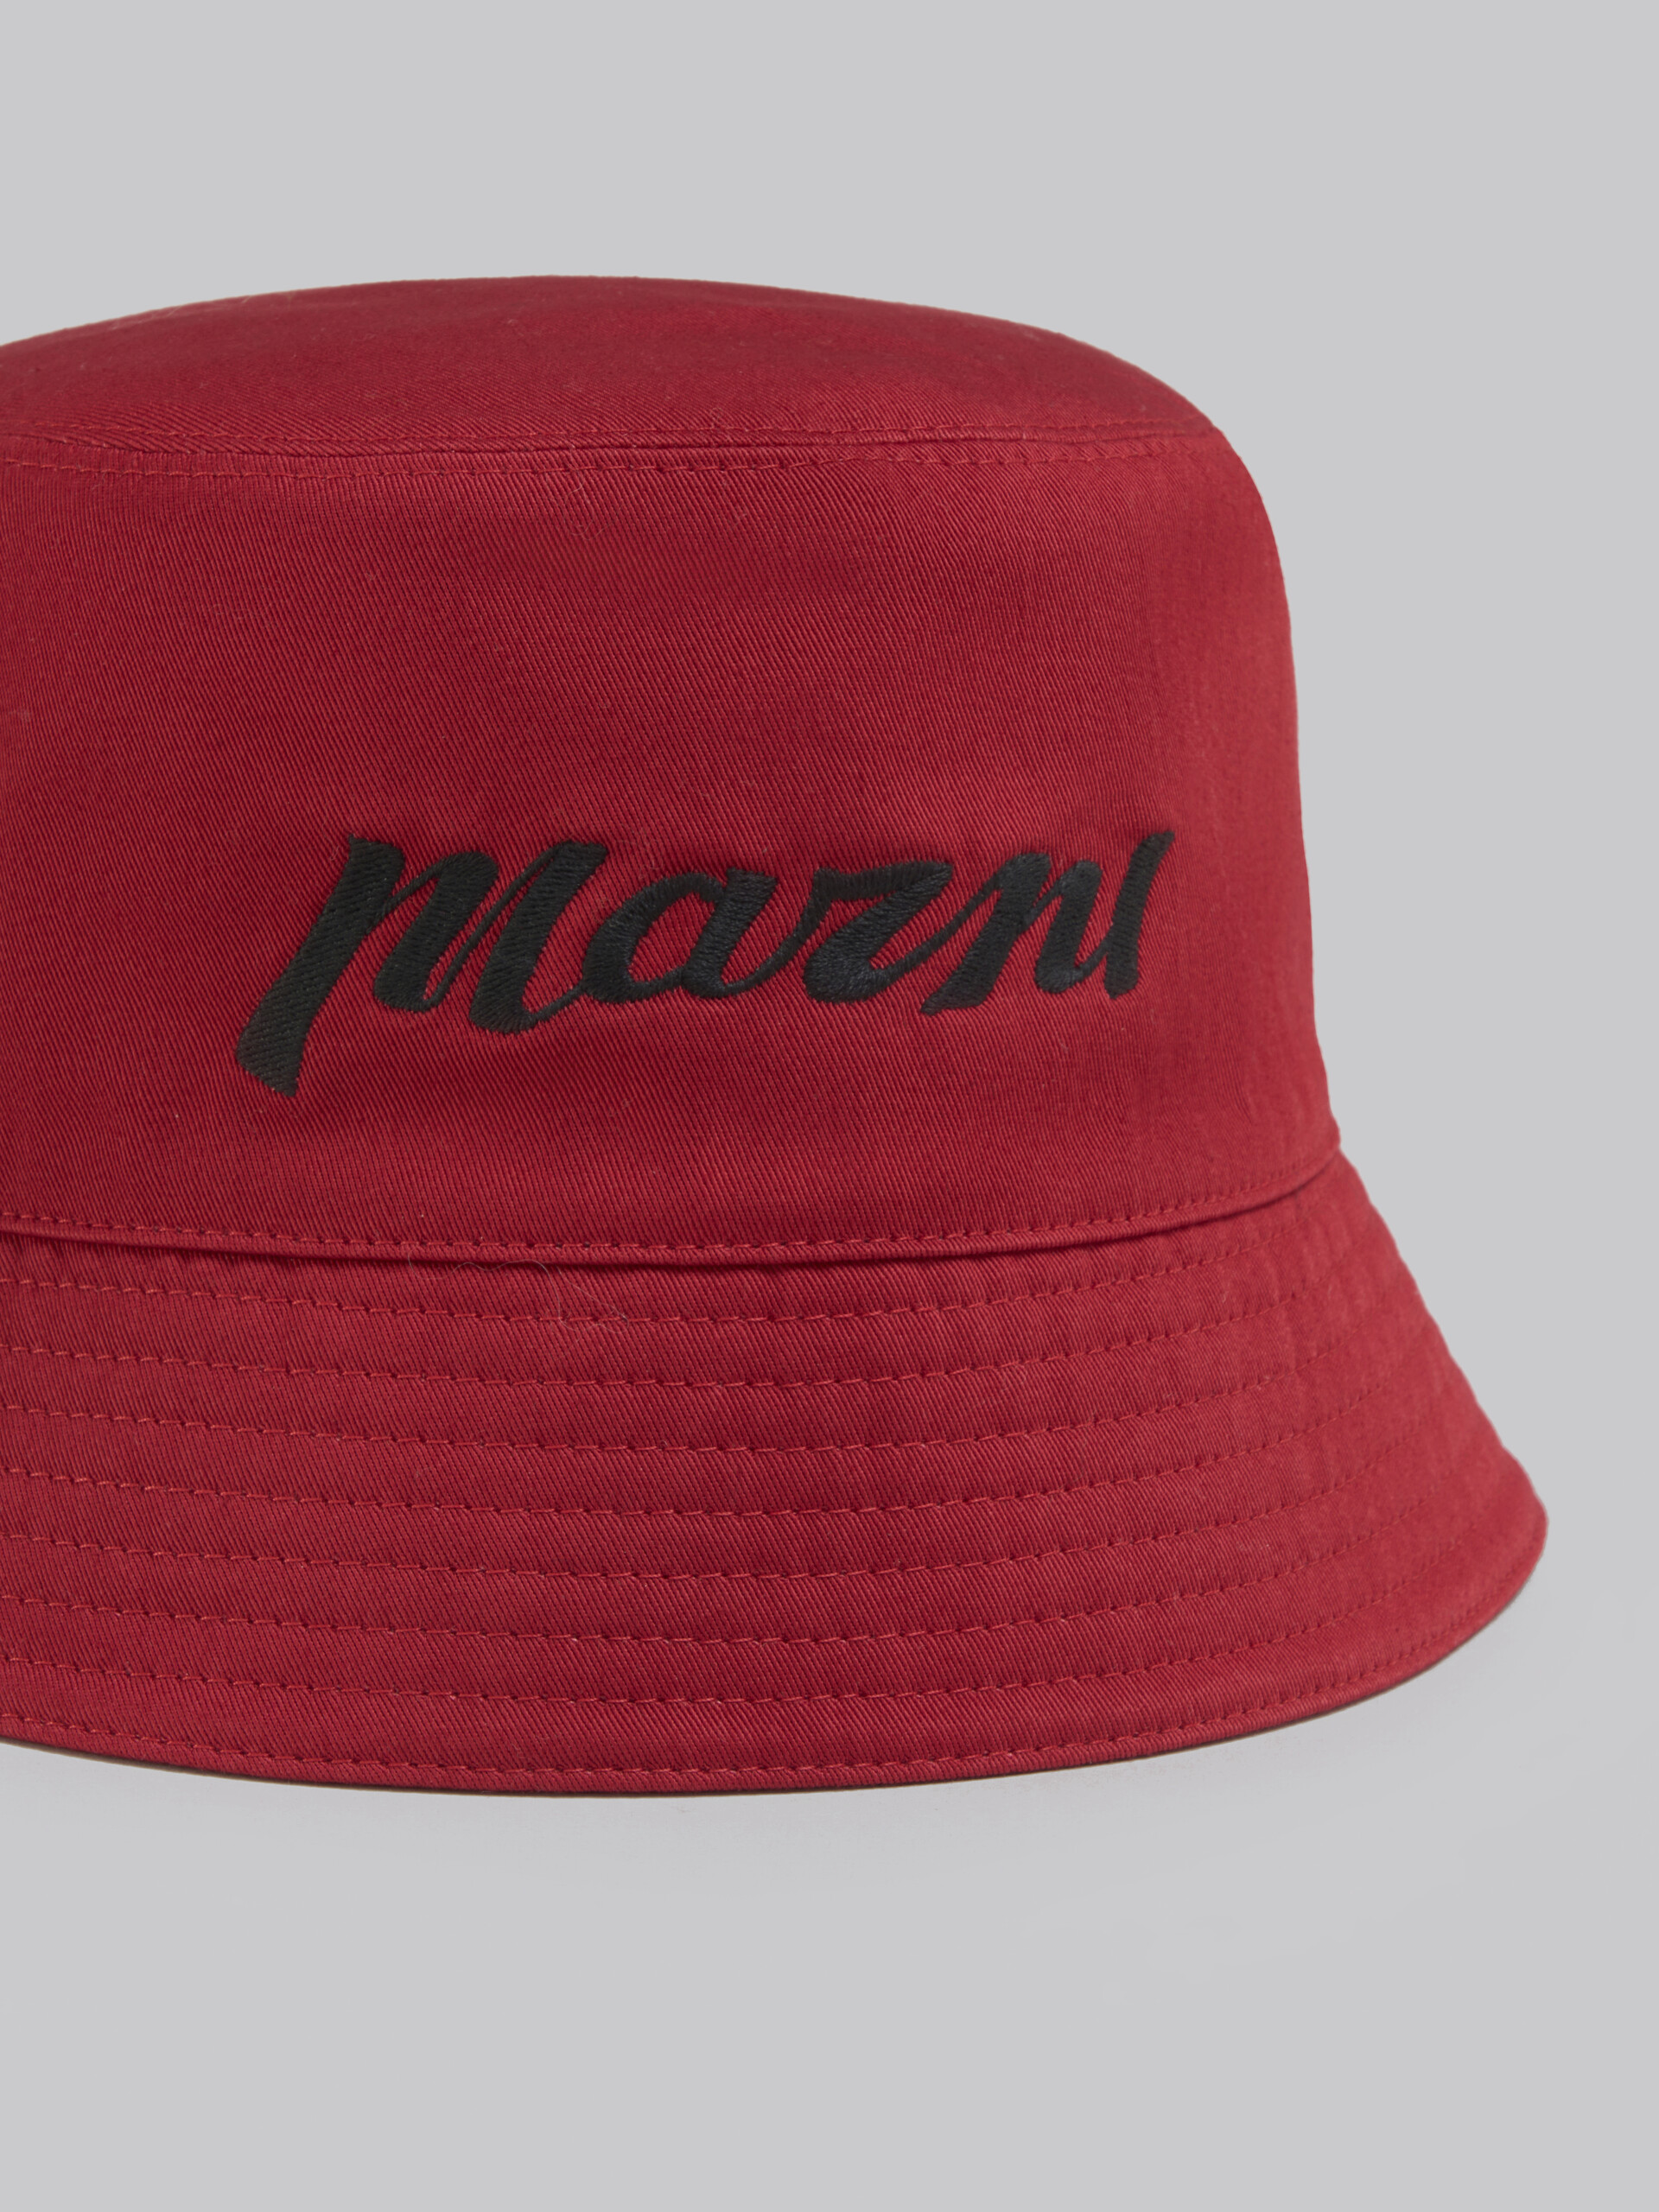 Black twill bucket hat with embroidered logo - Hats - Image 4